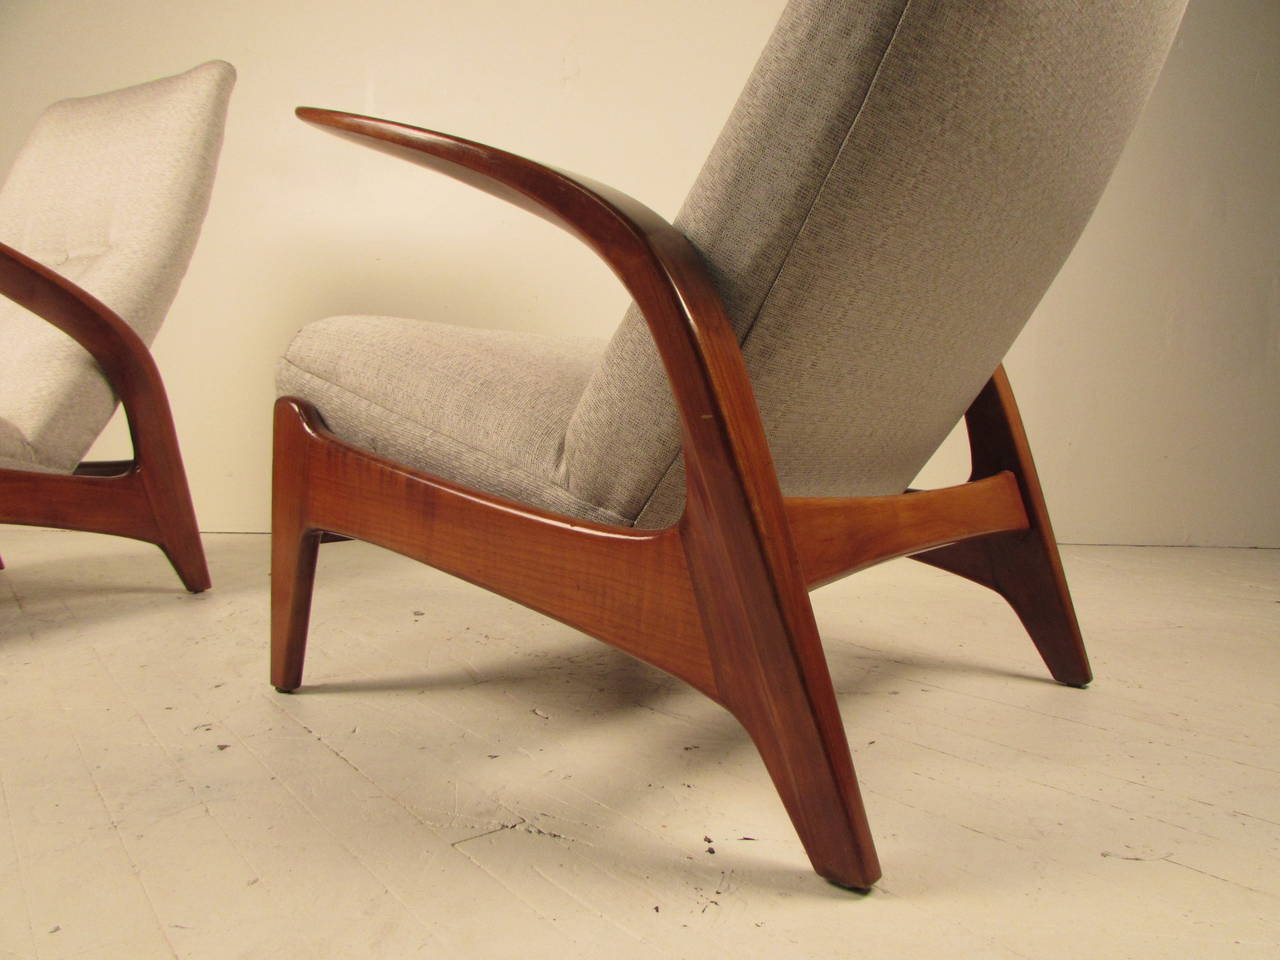 Teak Rare Pair of Sculptural Gimson and Slater Rock'n Rest Lounge Chairs